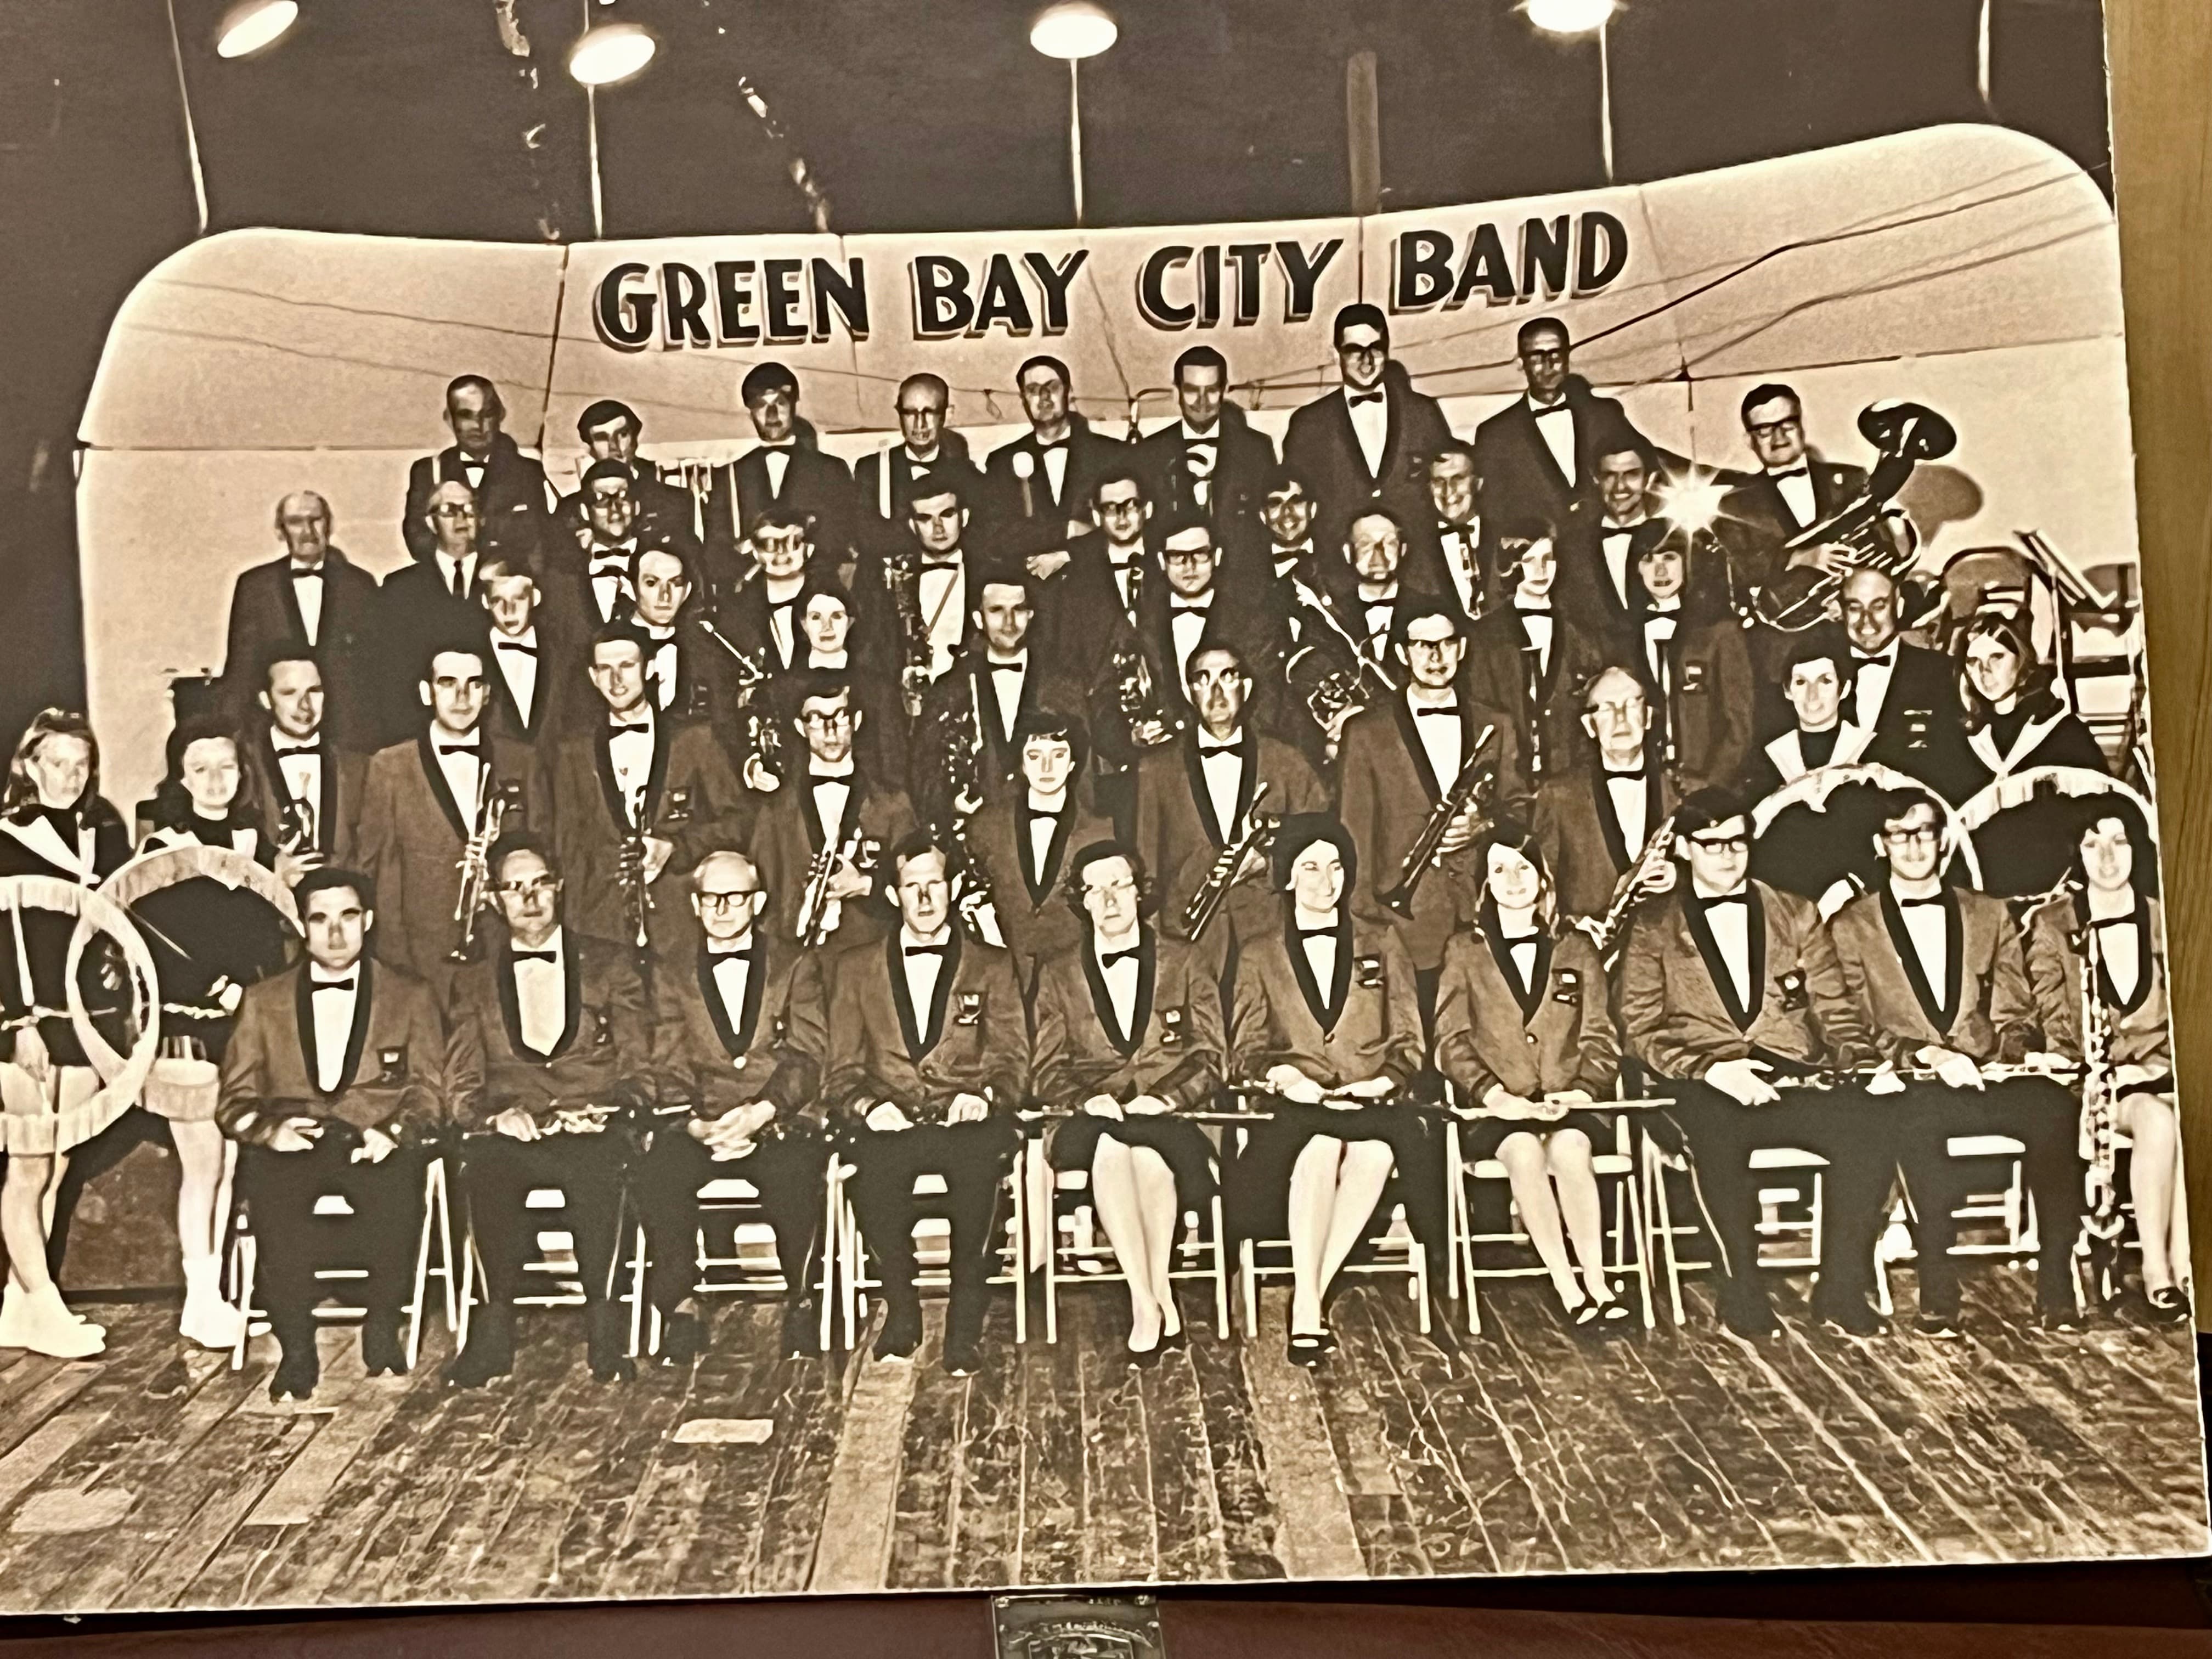 A black and white group photo of the 1969 Green Bay City Band posed on risers.